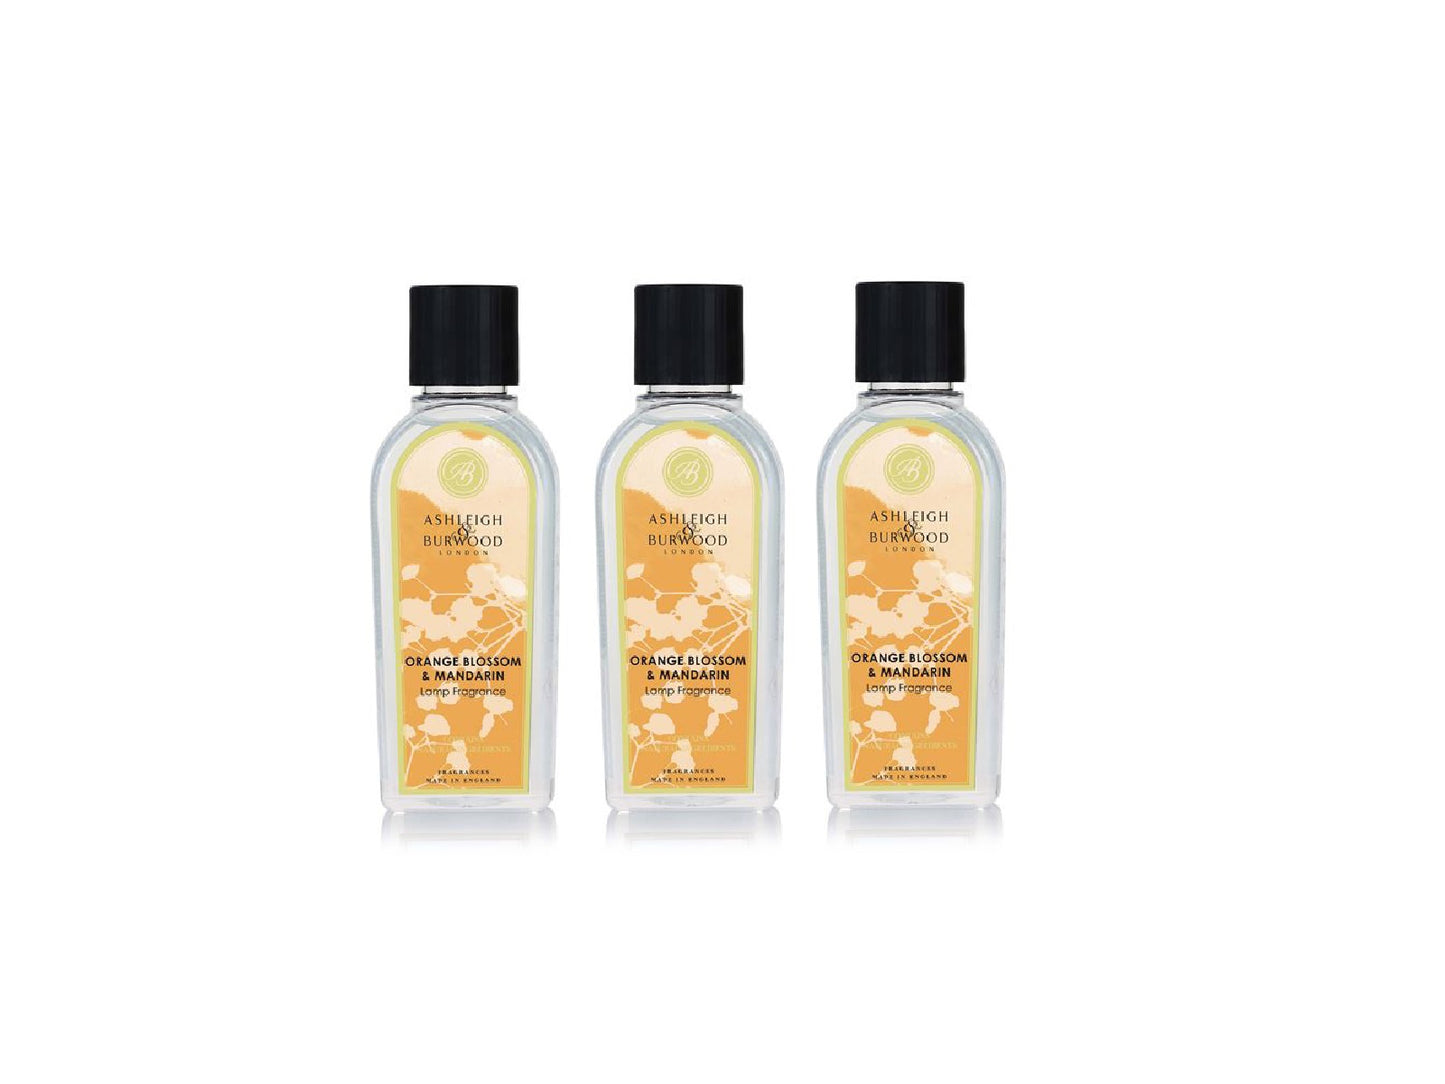 Three clear bottles of lamp liquid with orange floral labels and black caps